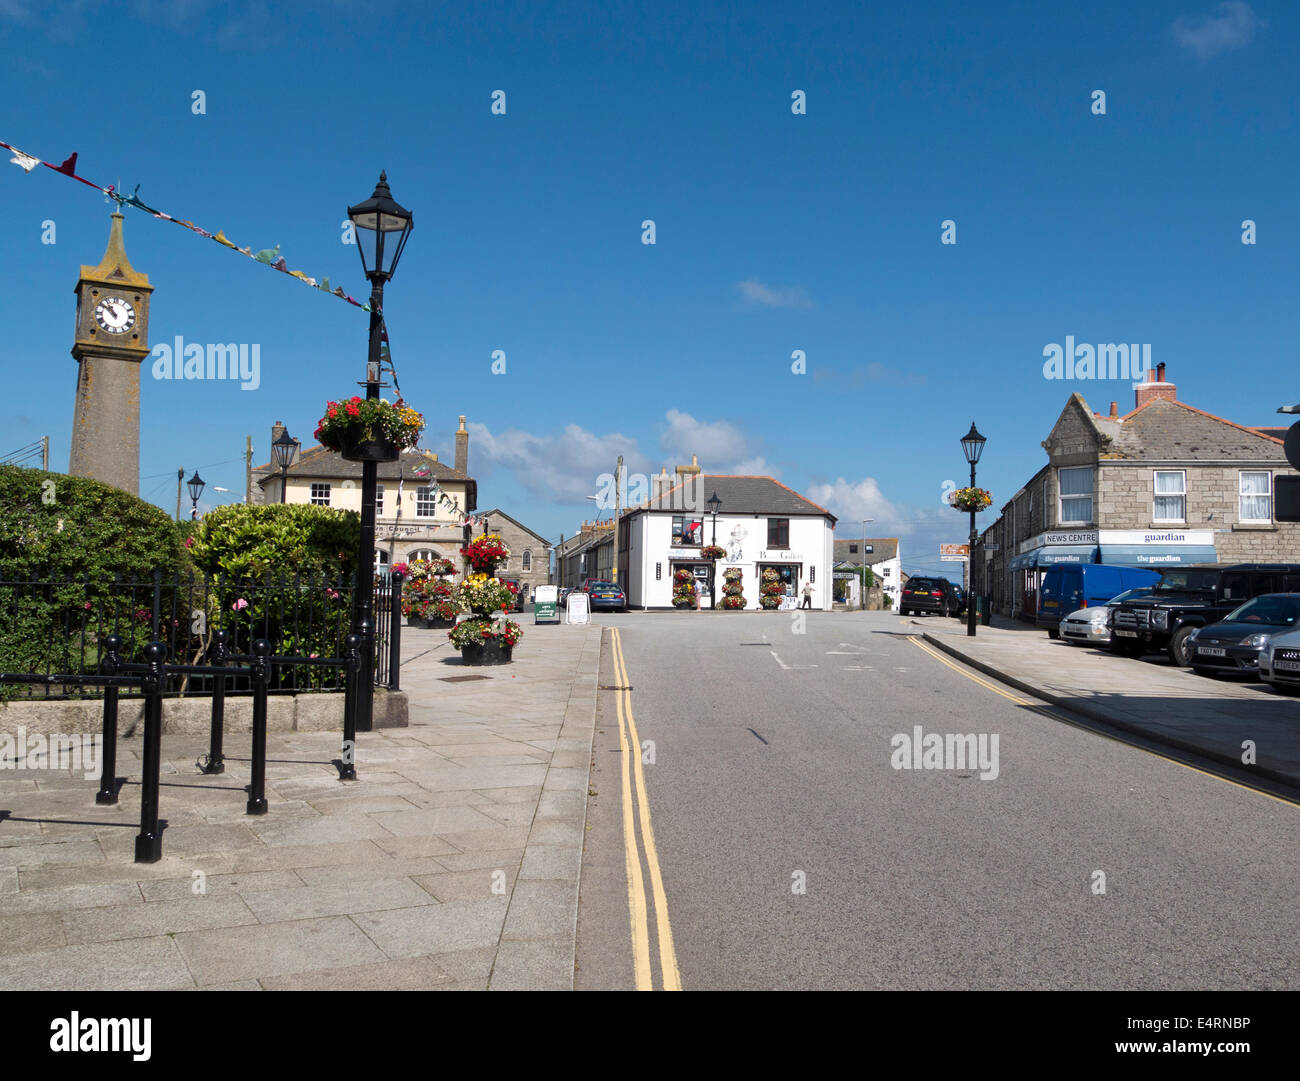 St Just Village, West Penwith, Cornwall UK. Stockfoto